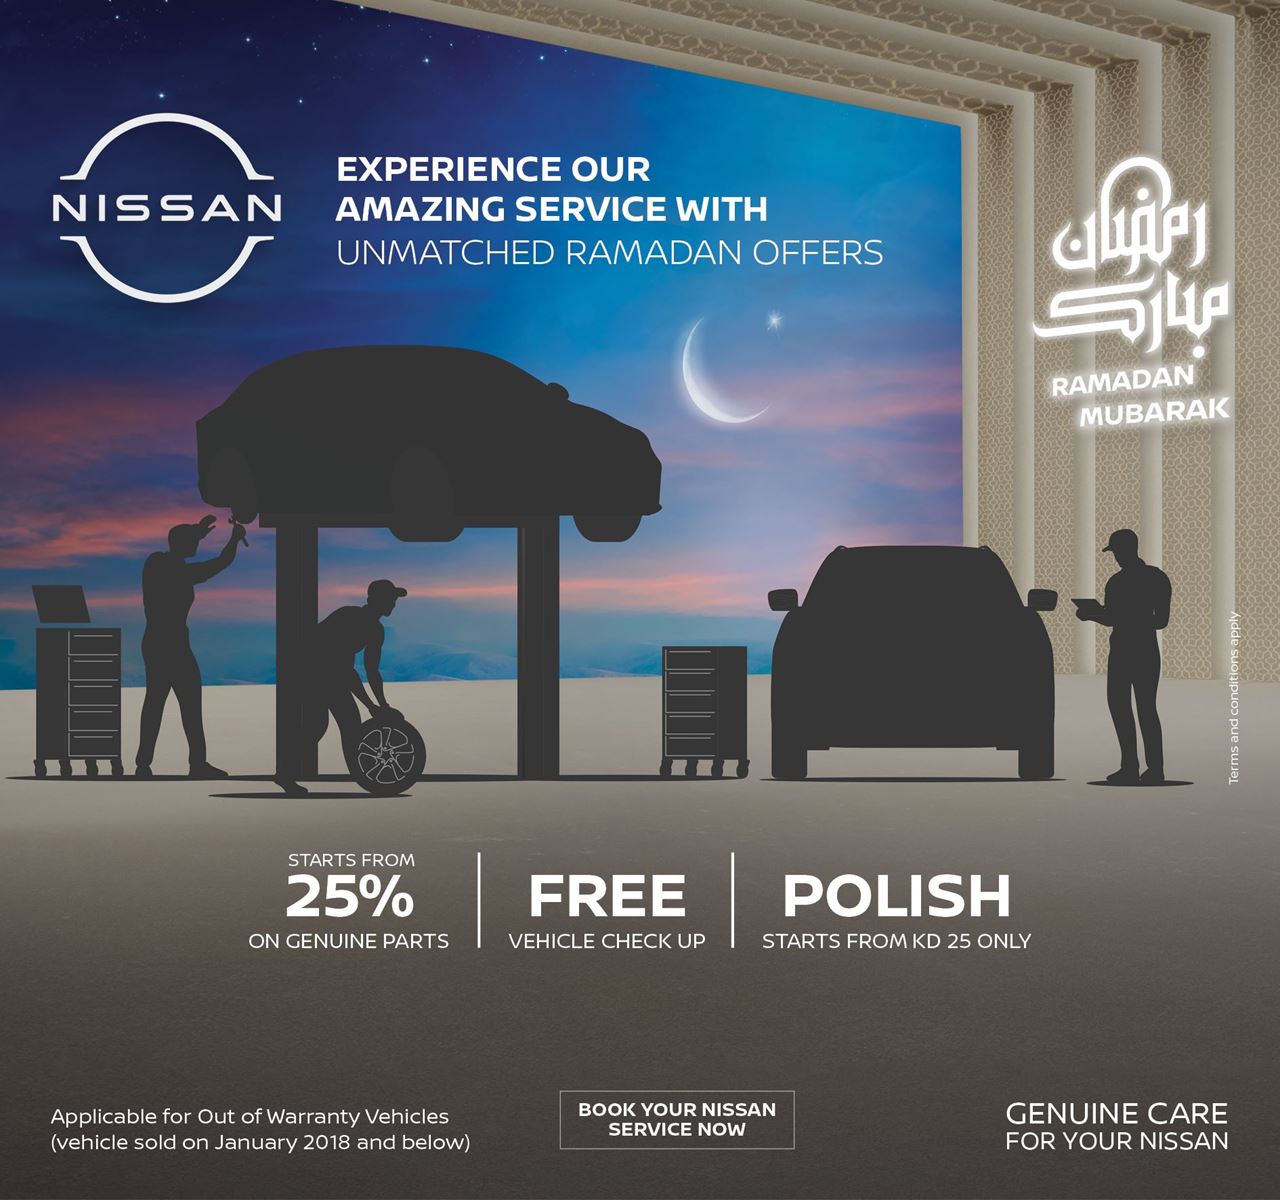 Exclusive Ramadan Service Offers from Nissan Al Babtain